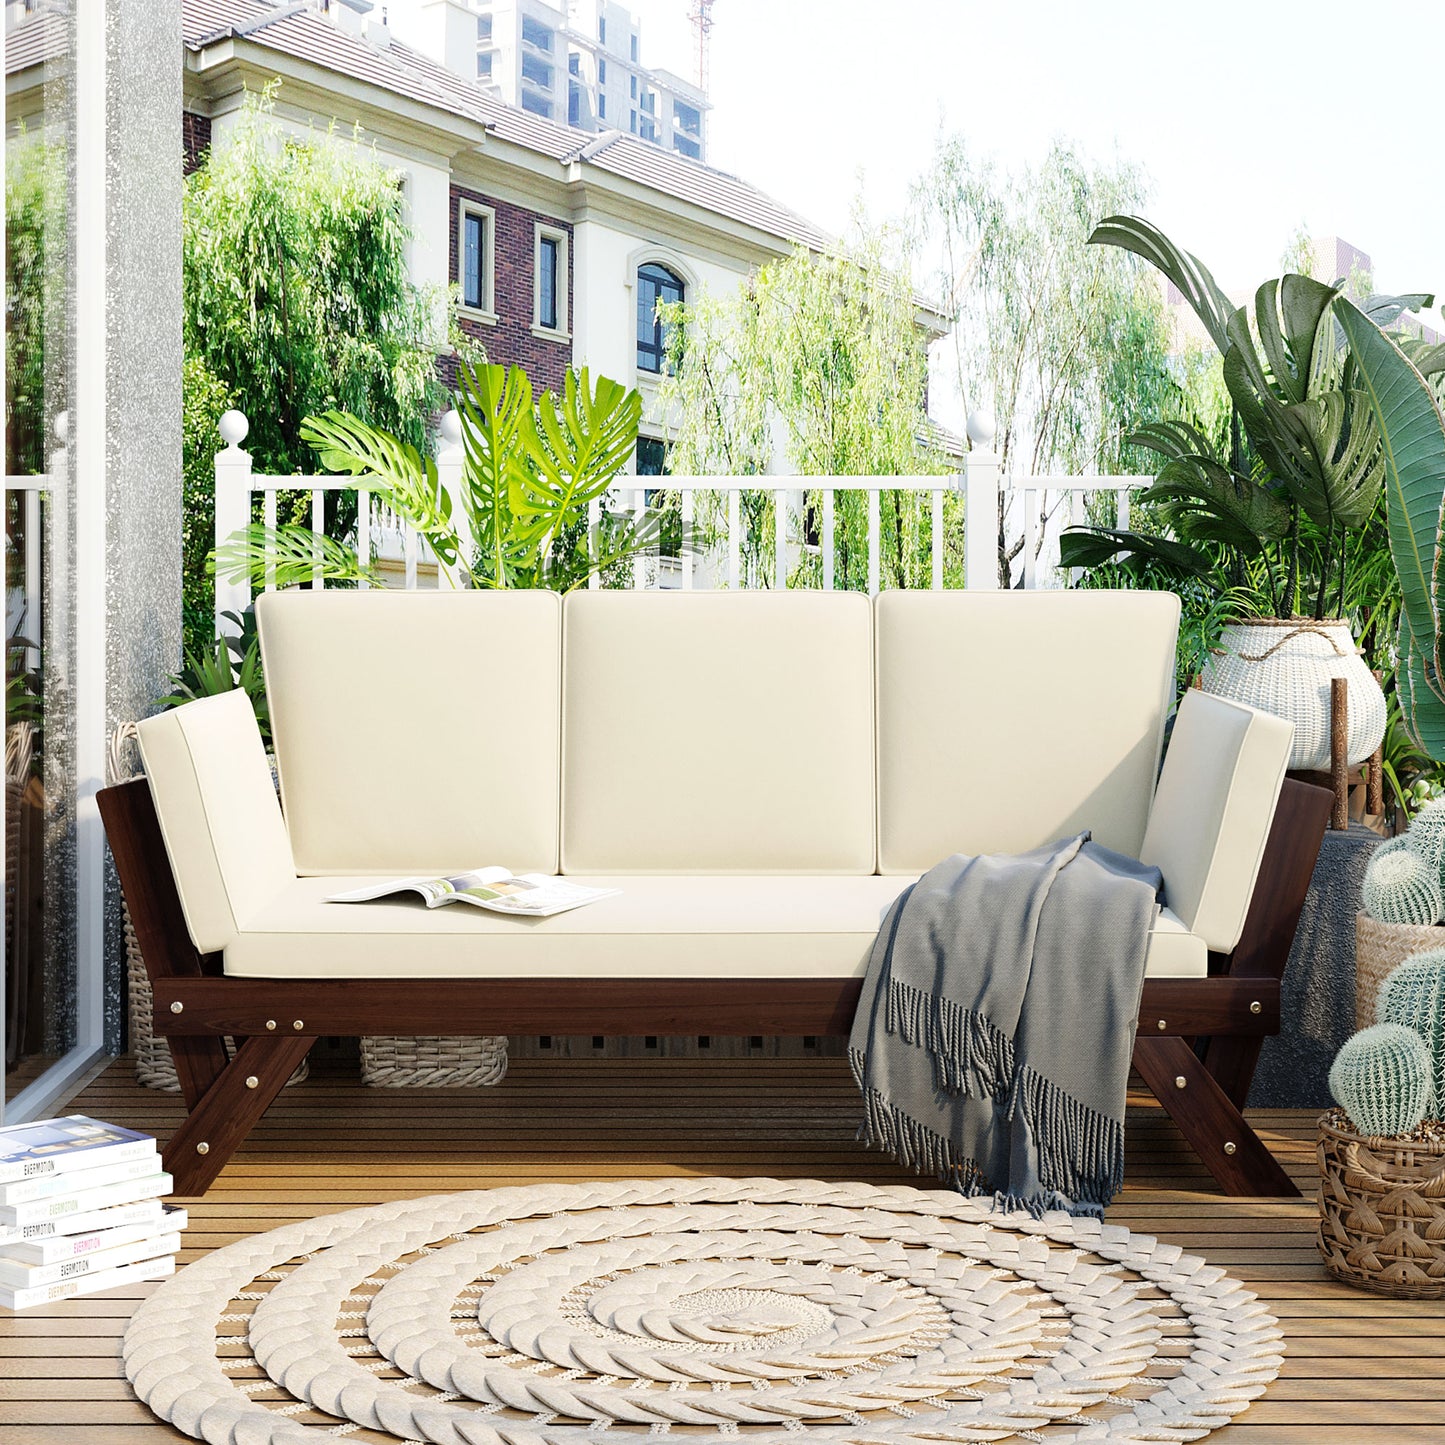 Patio Convertible Daybed, Wooden Couch Sofa Daybed with Adjustable Armrests, Outdoor Daybed with Beige Cushions, Backyard Chaise Lounge Bench for Balcony, Porch, Poolside, Y026